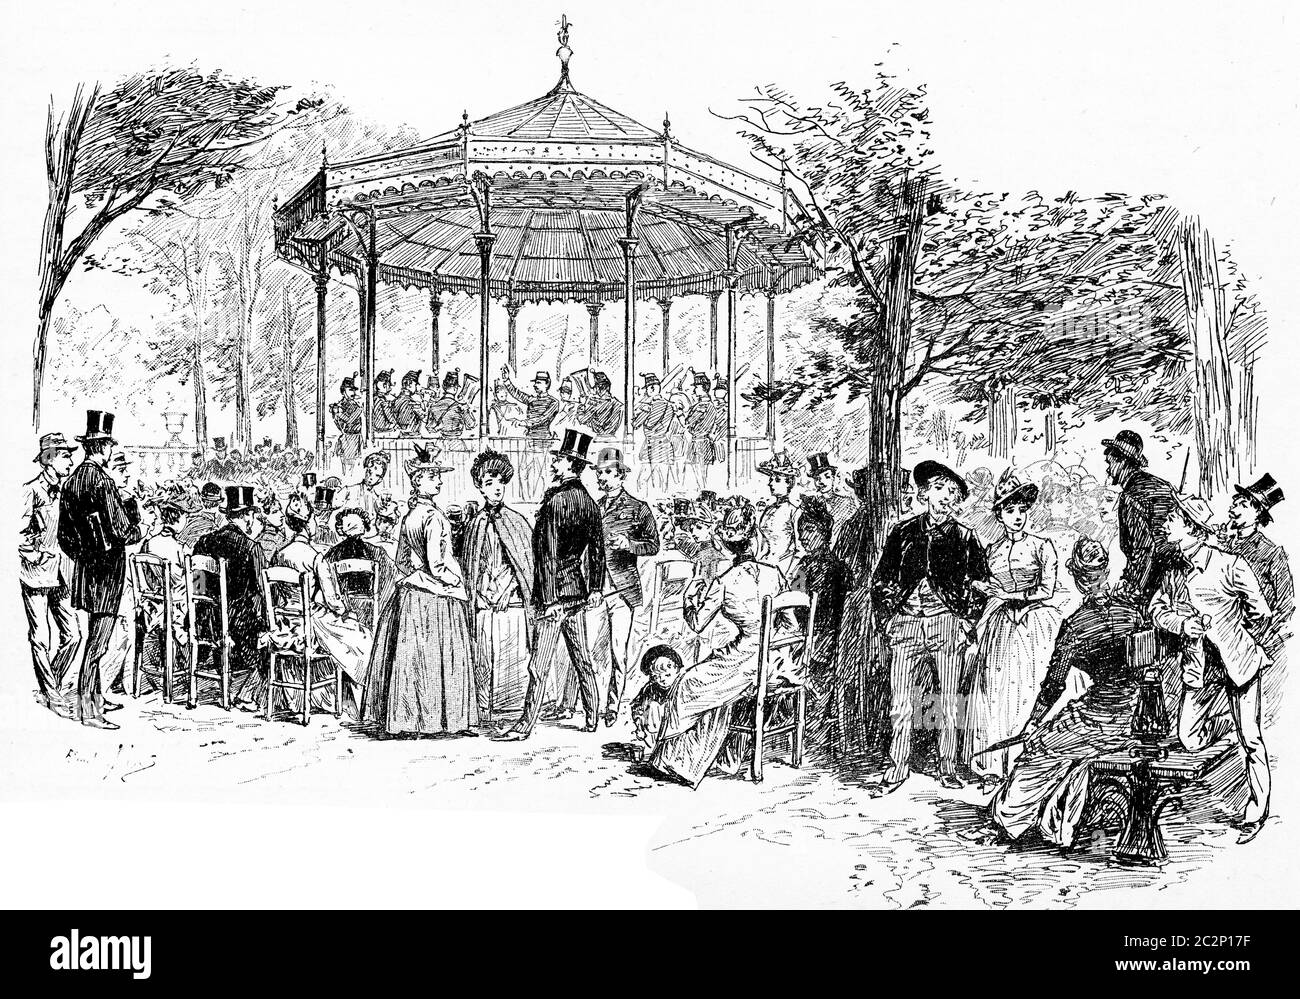 Military Music in the Luxembourg Gardens, vintage engraved illustration. Paris - Auguste VITU – 1890. Stock Photo